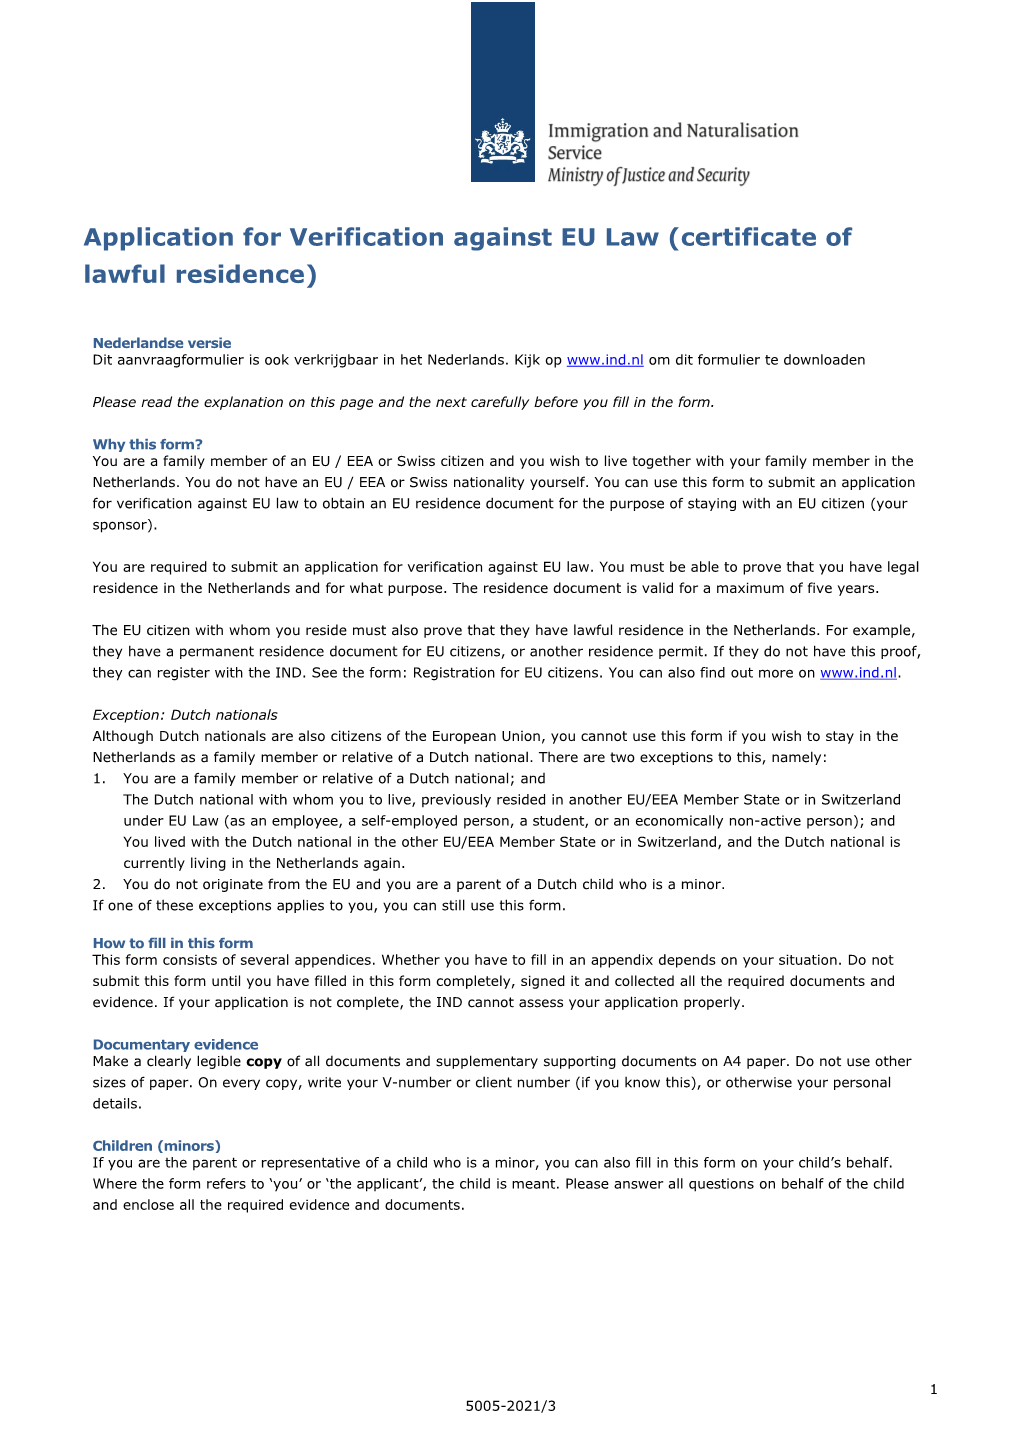 Application for Verification Against EU Law (Certificate of Lawful Residence)